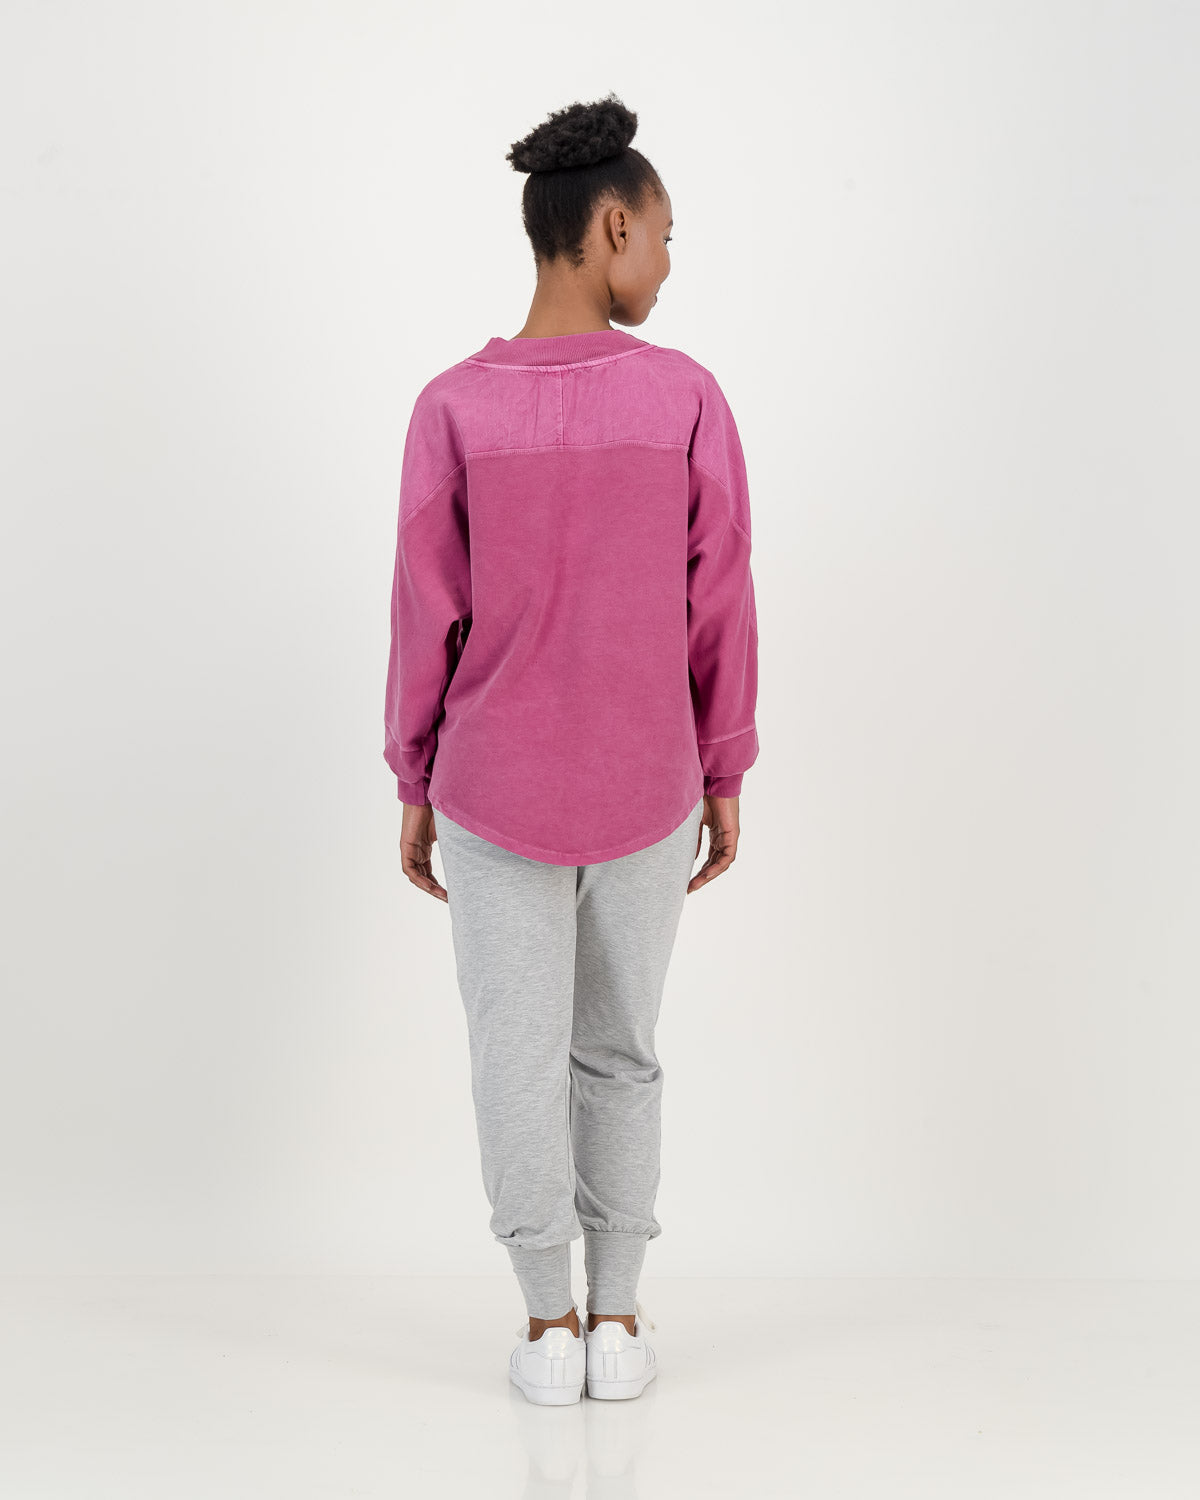 Batwing Overdyed Magenta Sweatshirt, loose fitting with longer back paired with light grey comfy pants